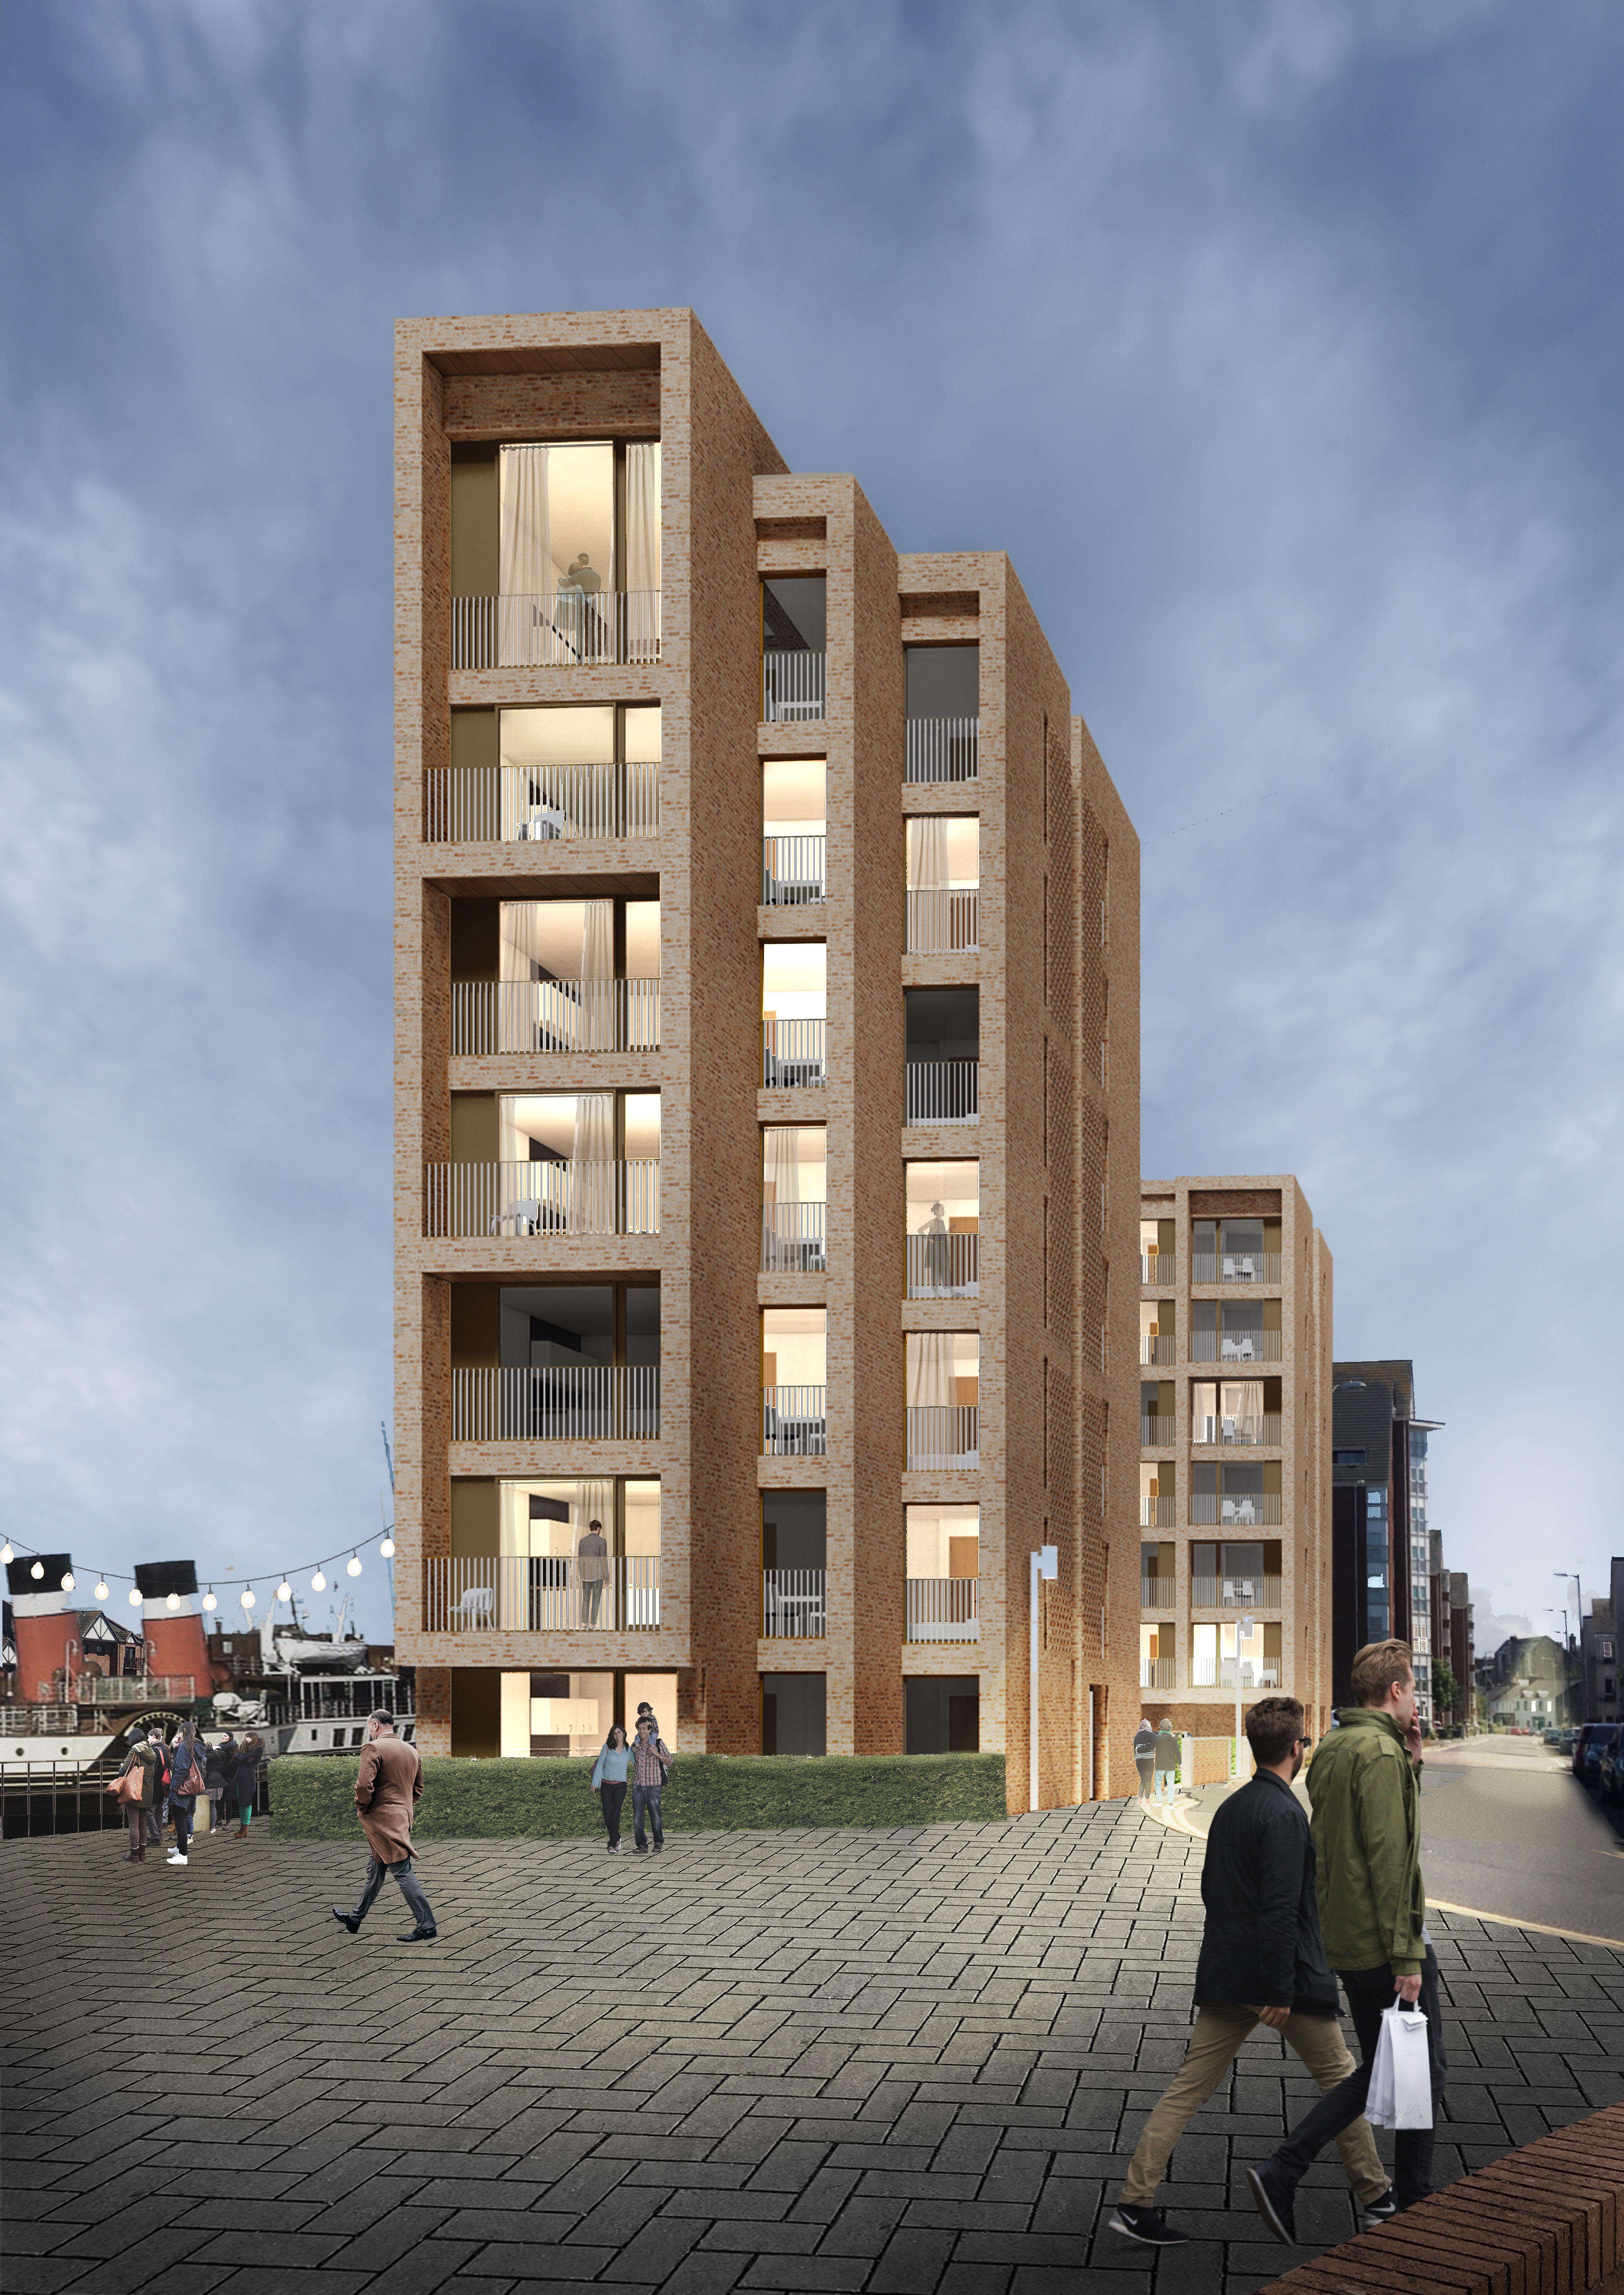 Ayrshire Housing Association submits plans for 40 flats on Ayr's harbourside